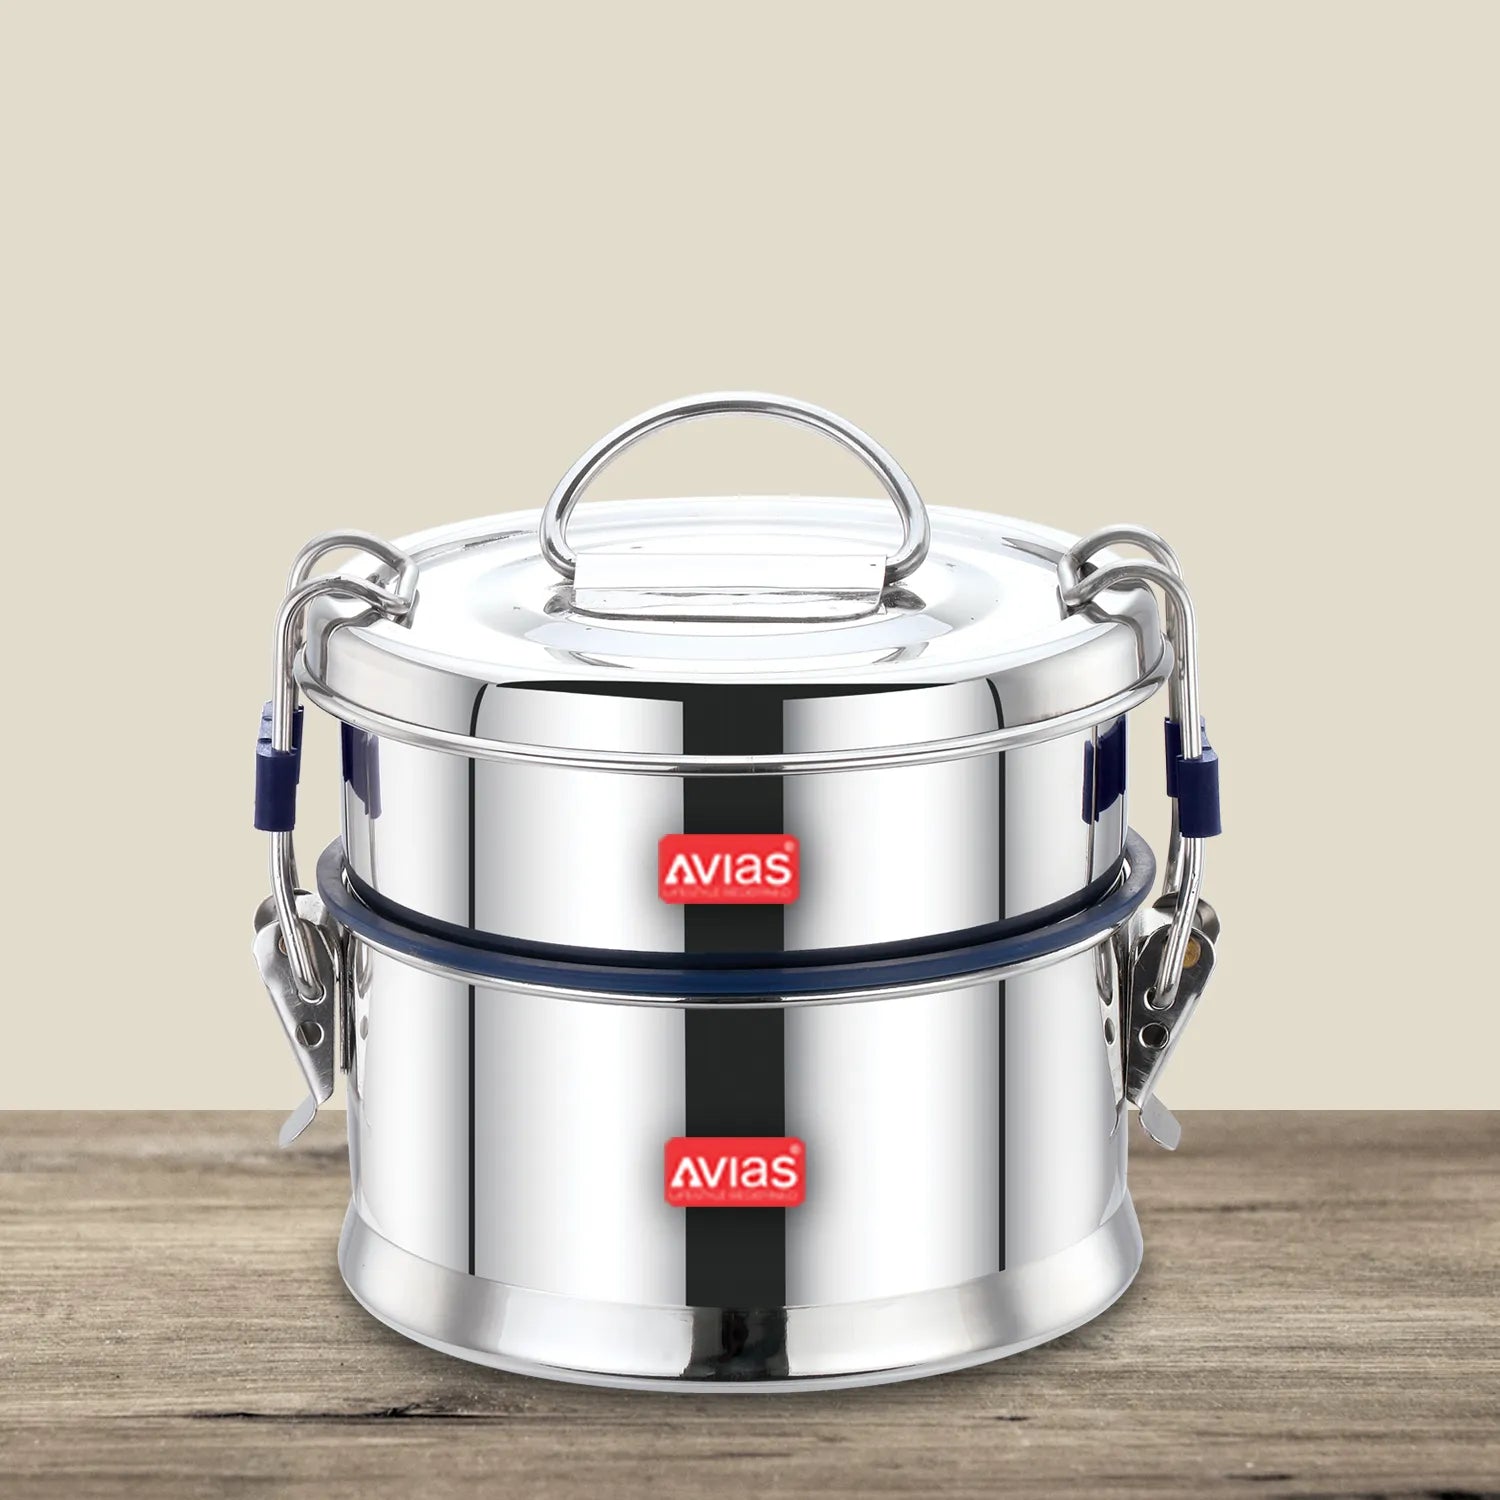 AVIAS Ivy Stainless Steel Lunch box